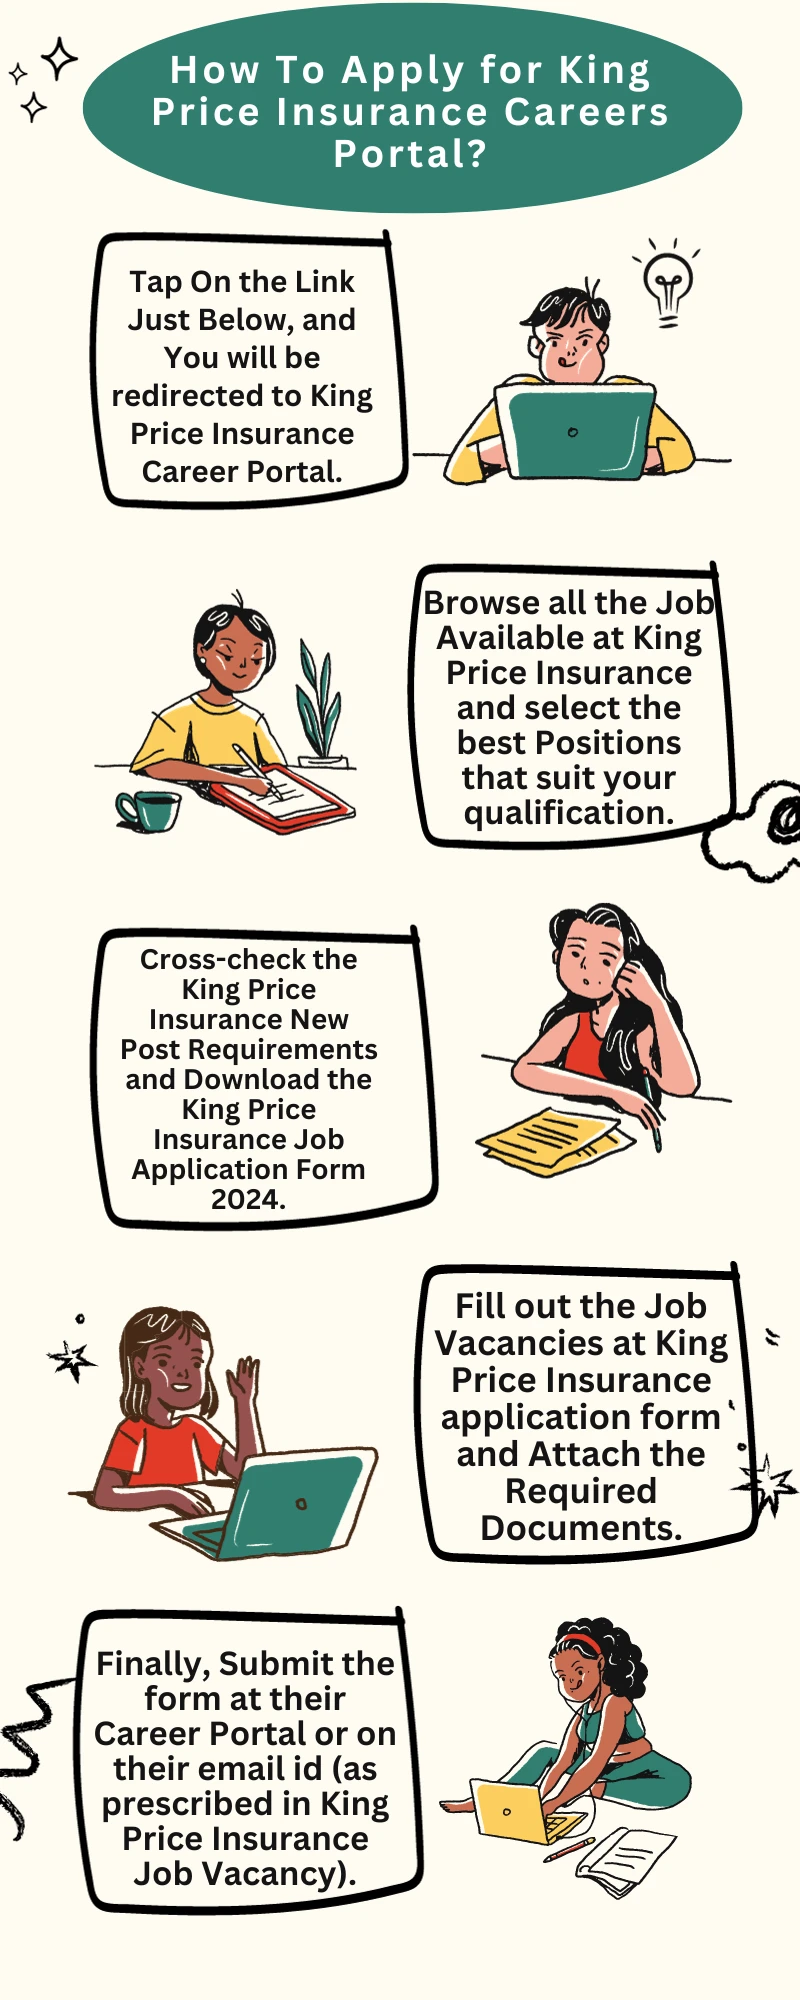 How To Apply for King Price Insurance Careers Portal